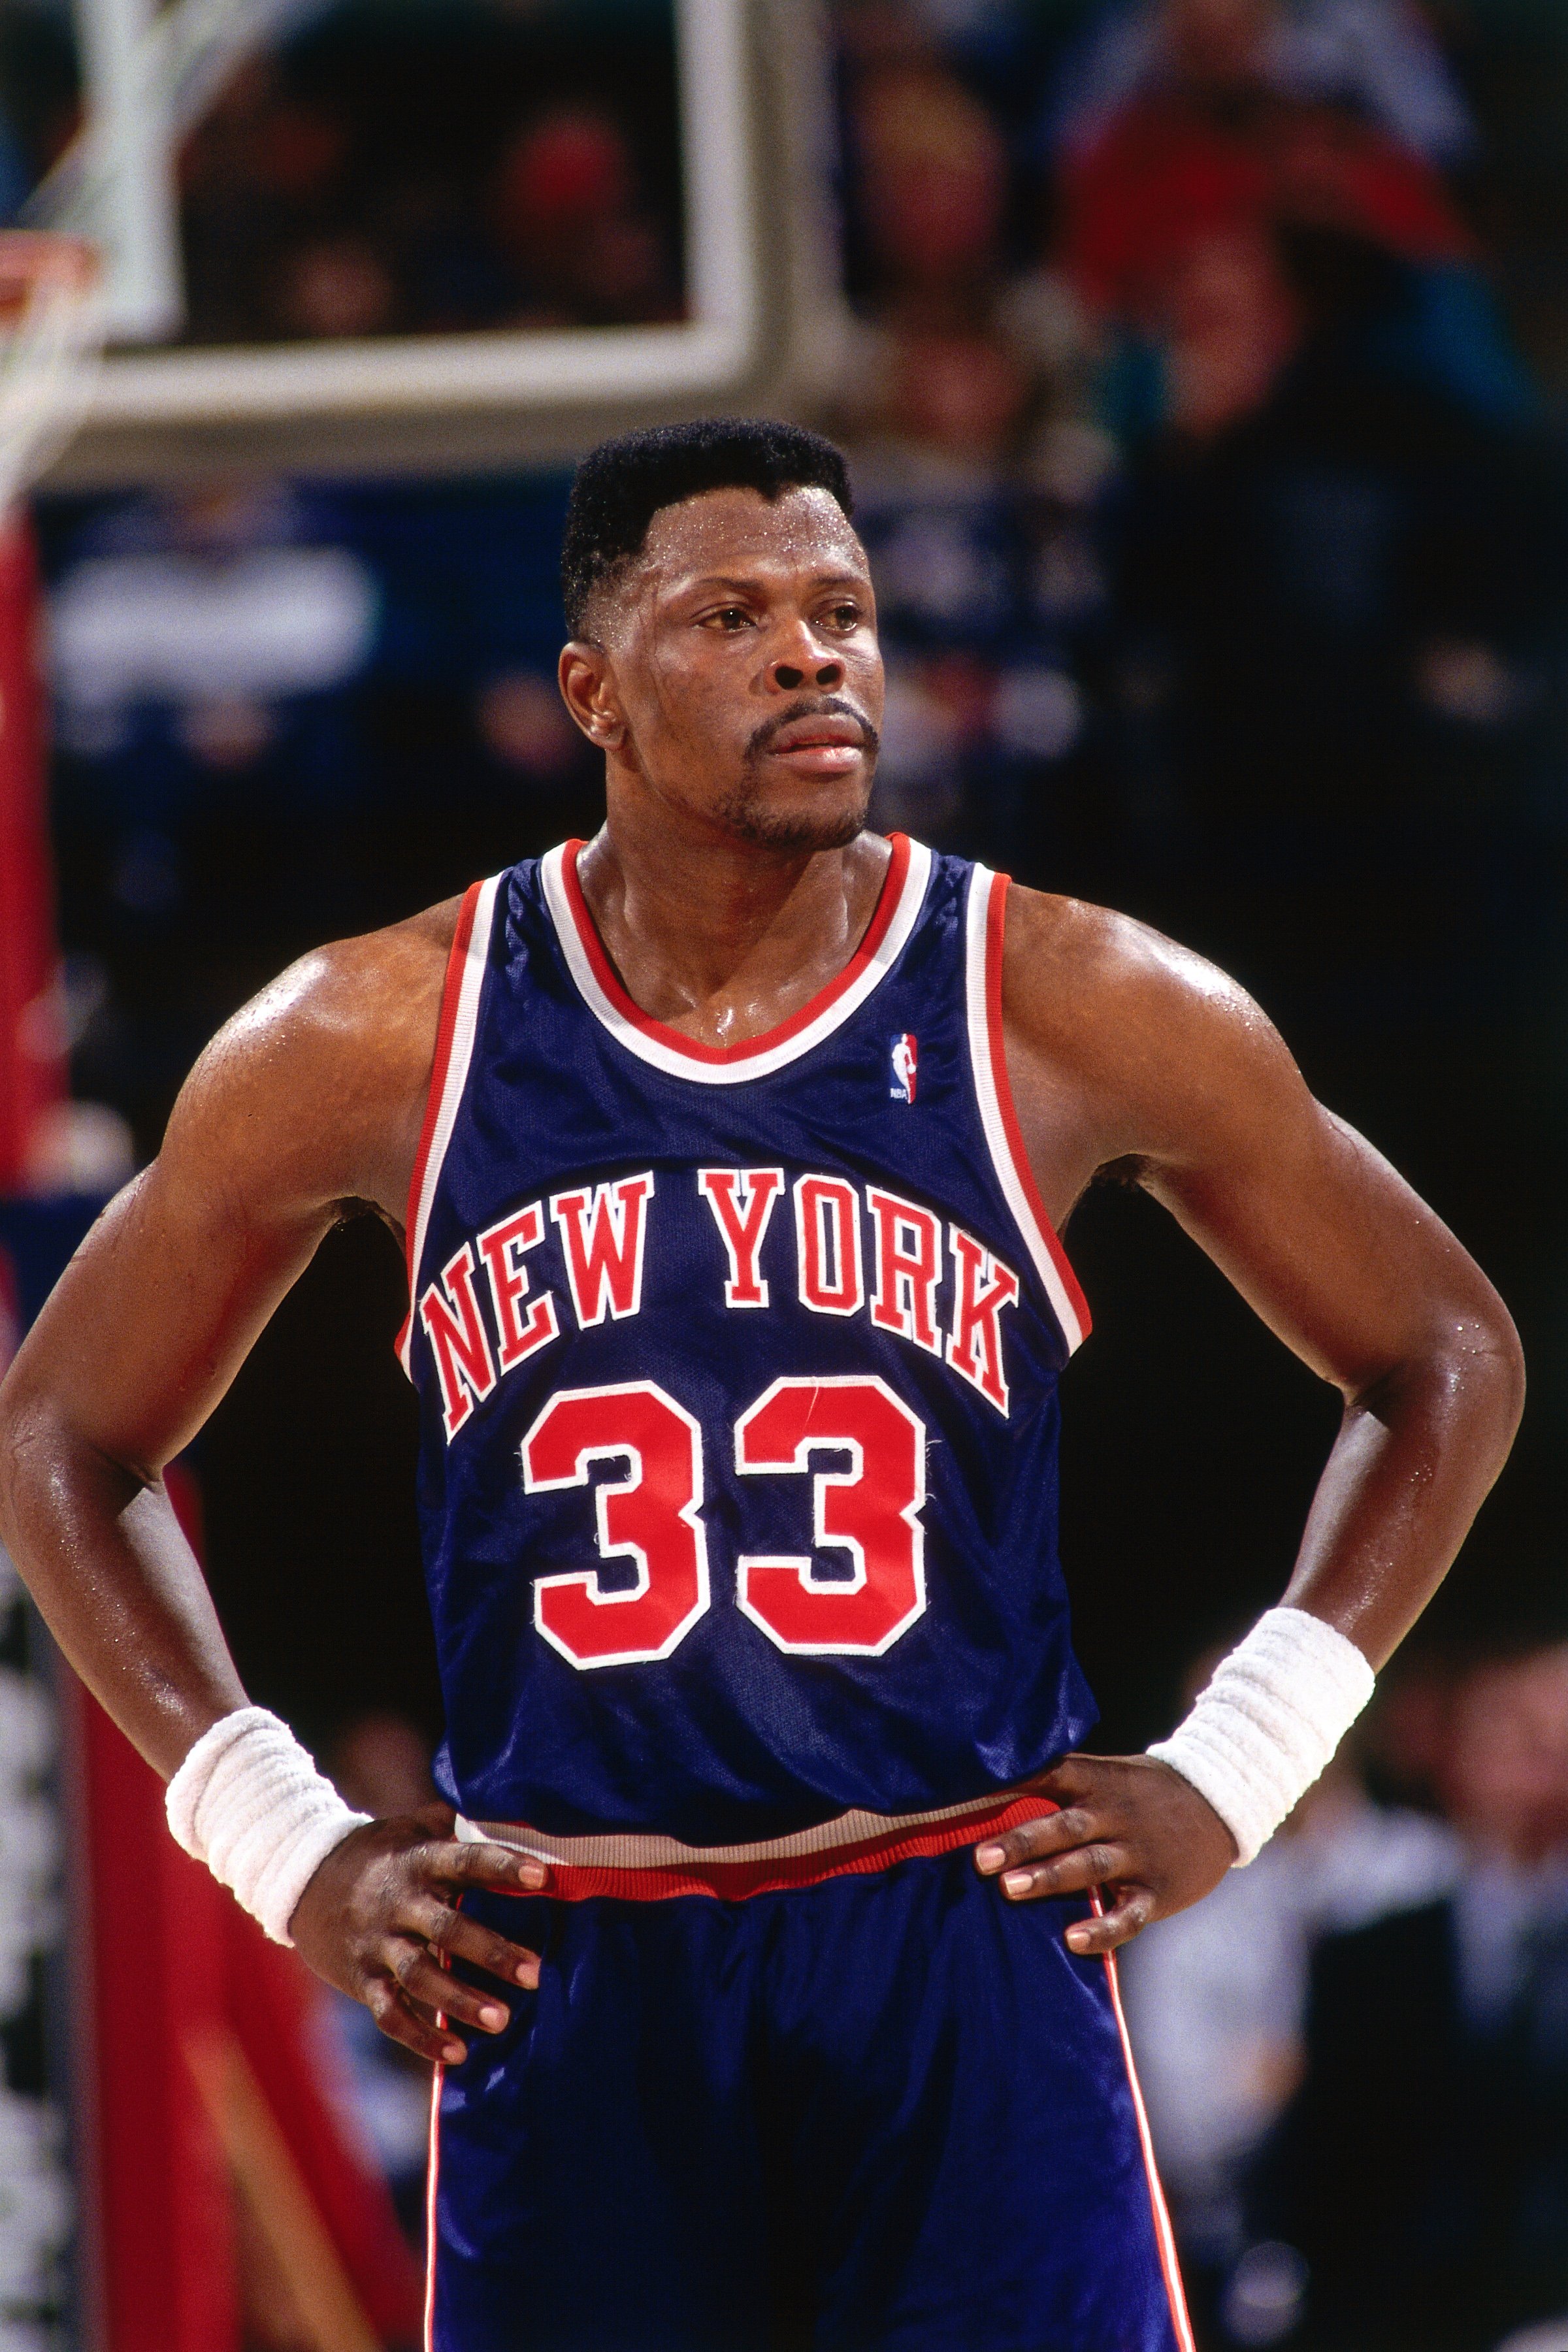 Patrick Ewing #33 of the New York Knicks looks on against the Sacramento Kings on January 12, 1993 in Sacramento, California. | Photo: GettyImages